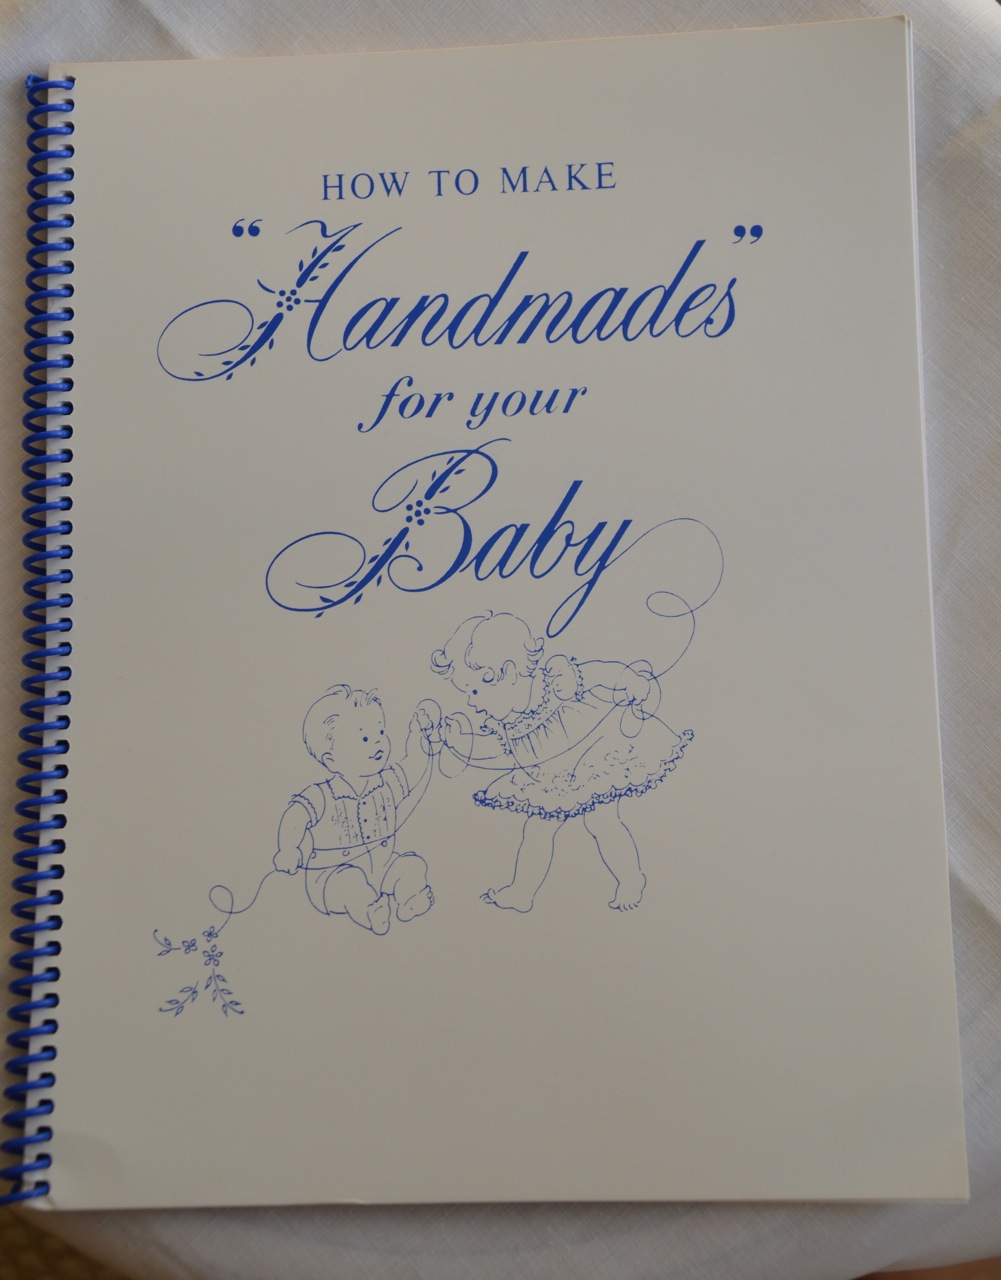 How To Make Handmades for your Baby - Design Book